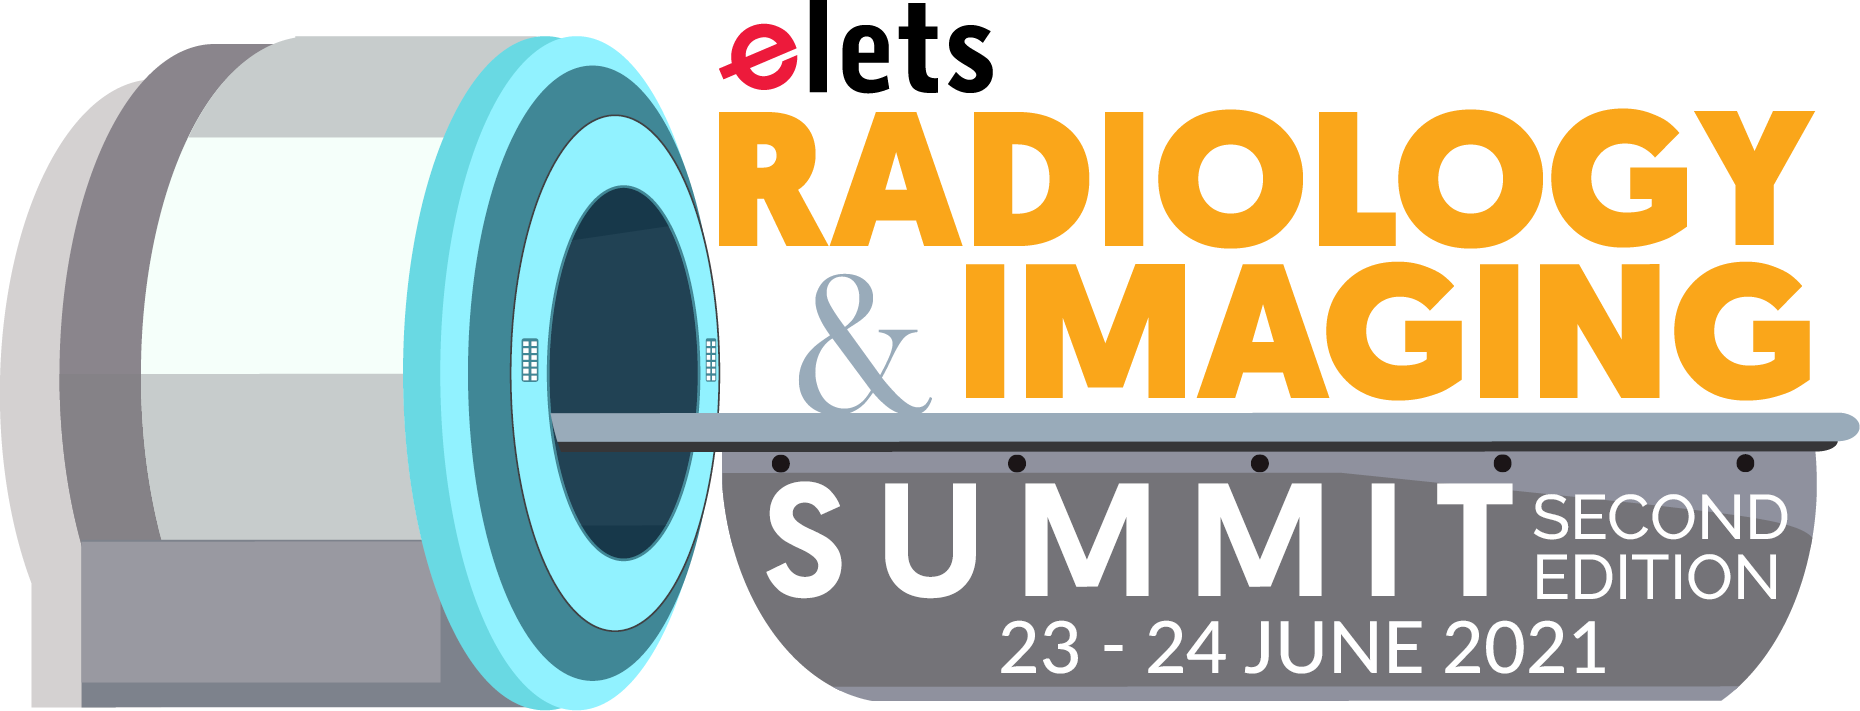 2nd Radiology and Imaging Summit 2021